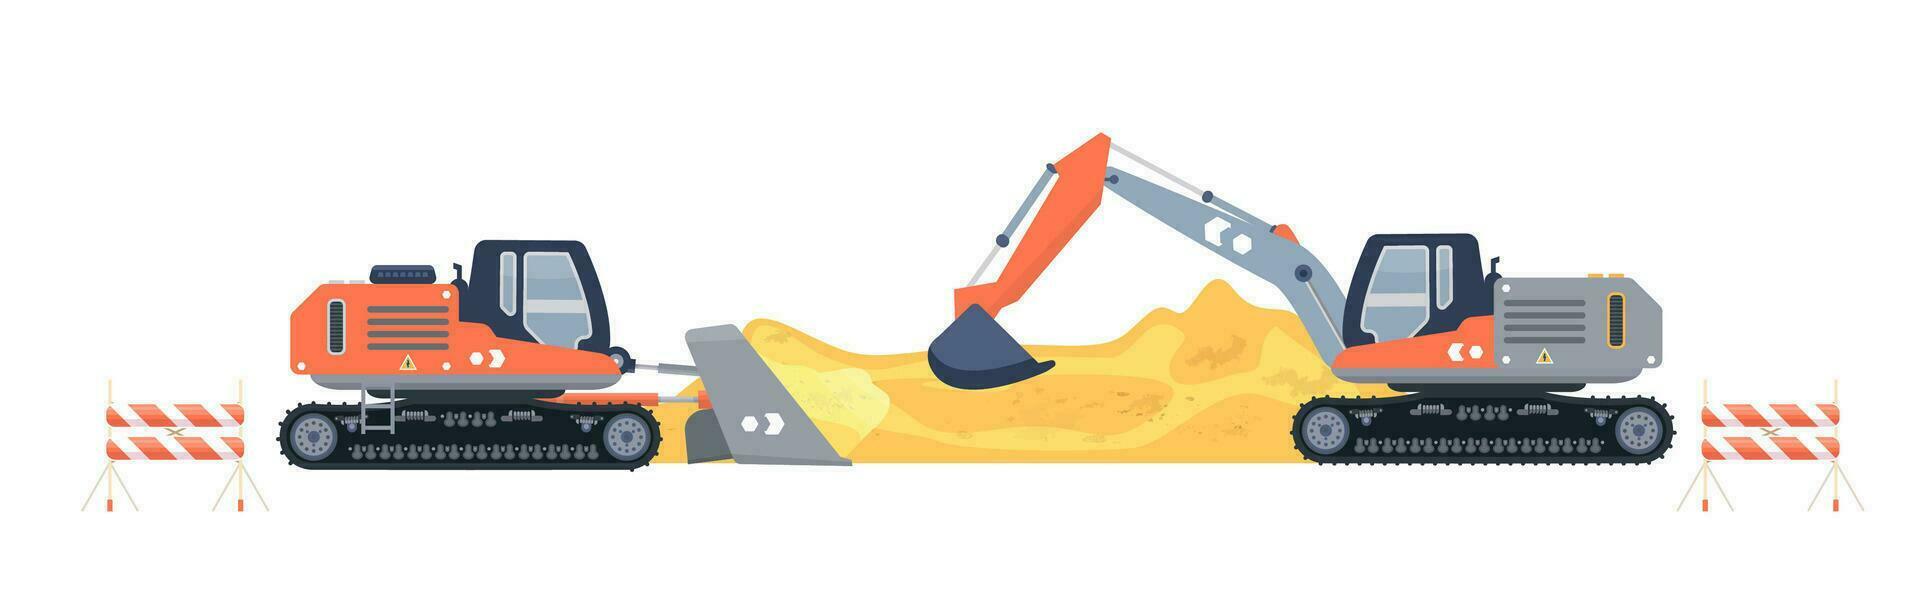 Construction site with excavator and bulldozer. Heavy machinery. Sand, concrete. Flat vector illustration.